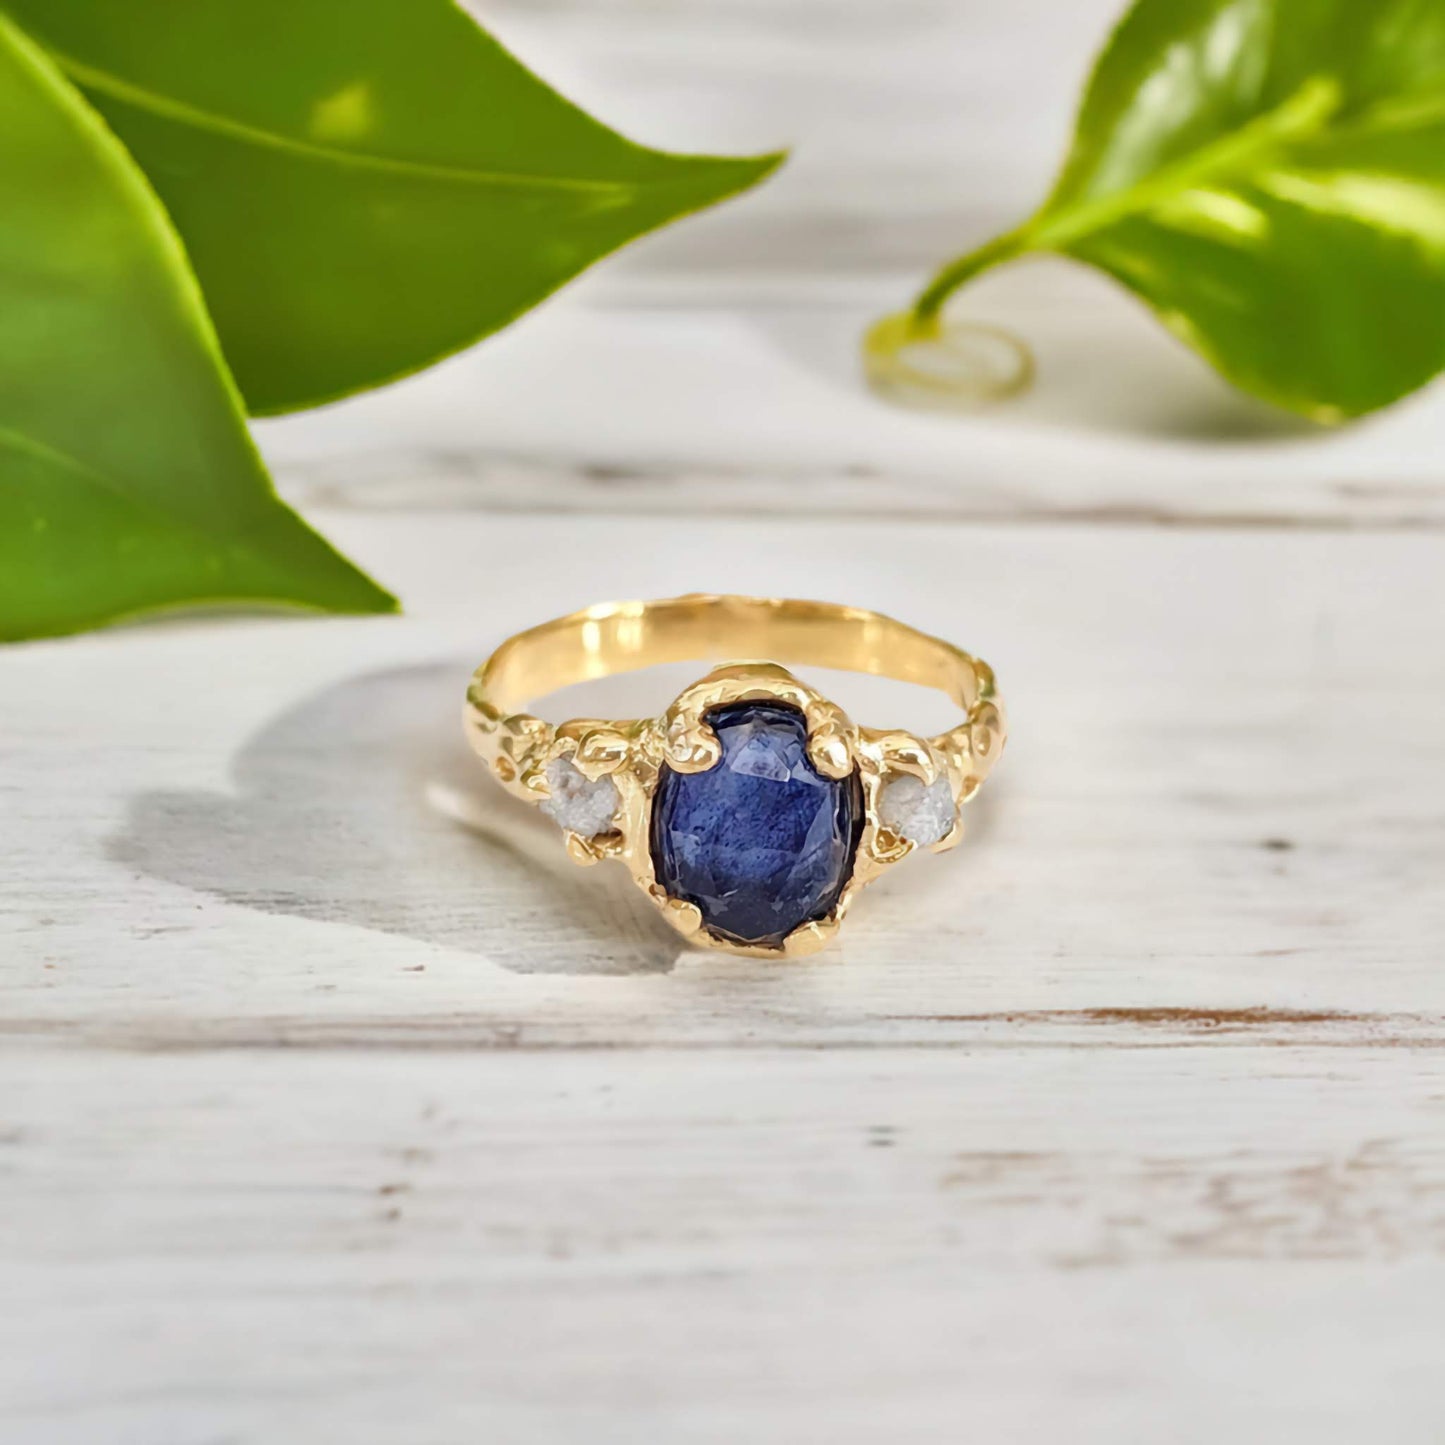 Oval Blue Sapphire and 2 small raw diamonds set by prongs on a textured Solid 14k Gold band